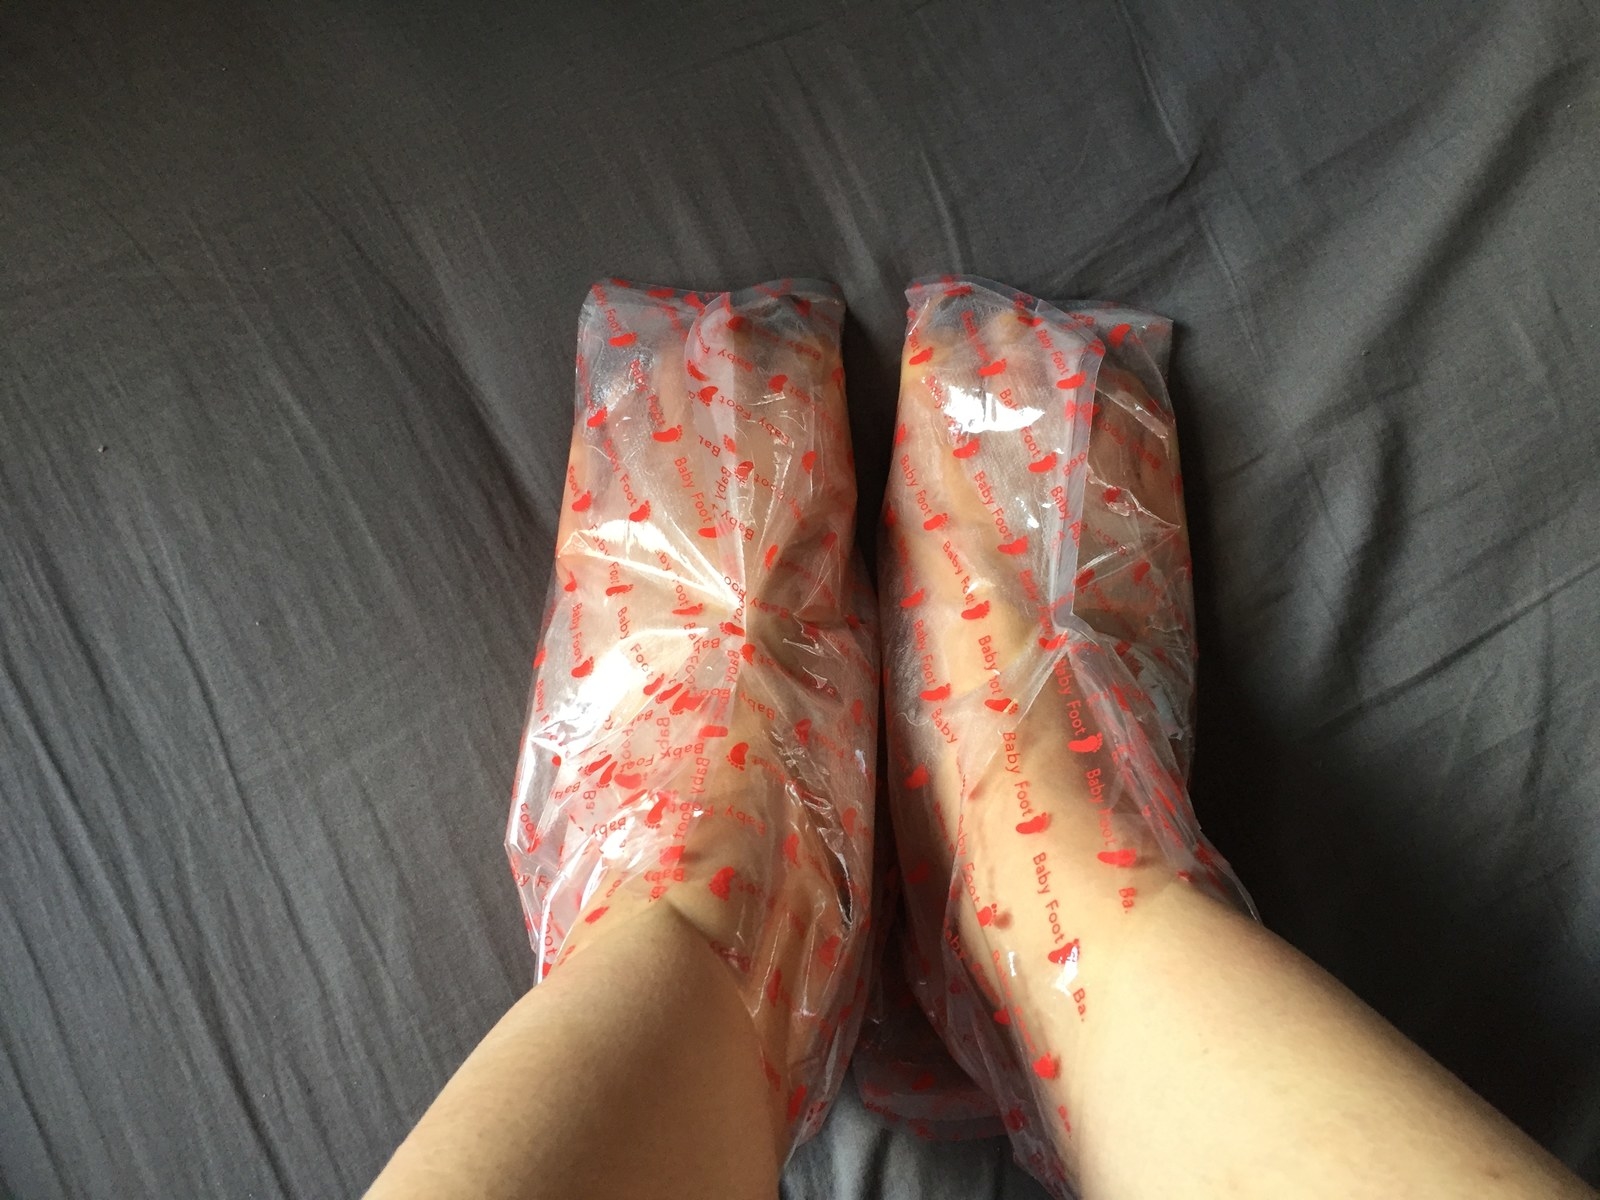 I Tried This Insane Foot Peel Kit And Here S What Happened